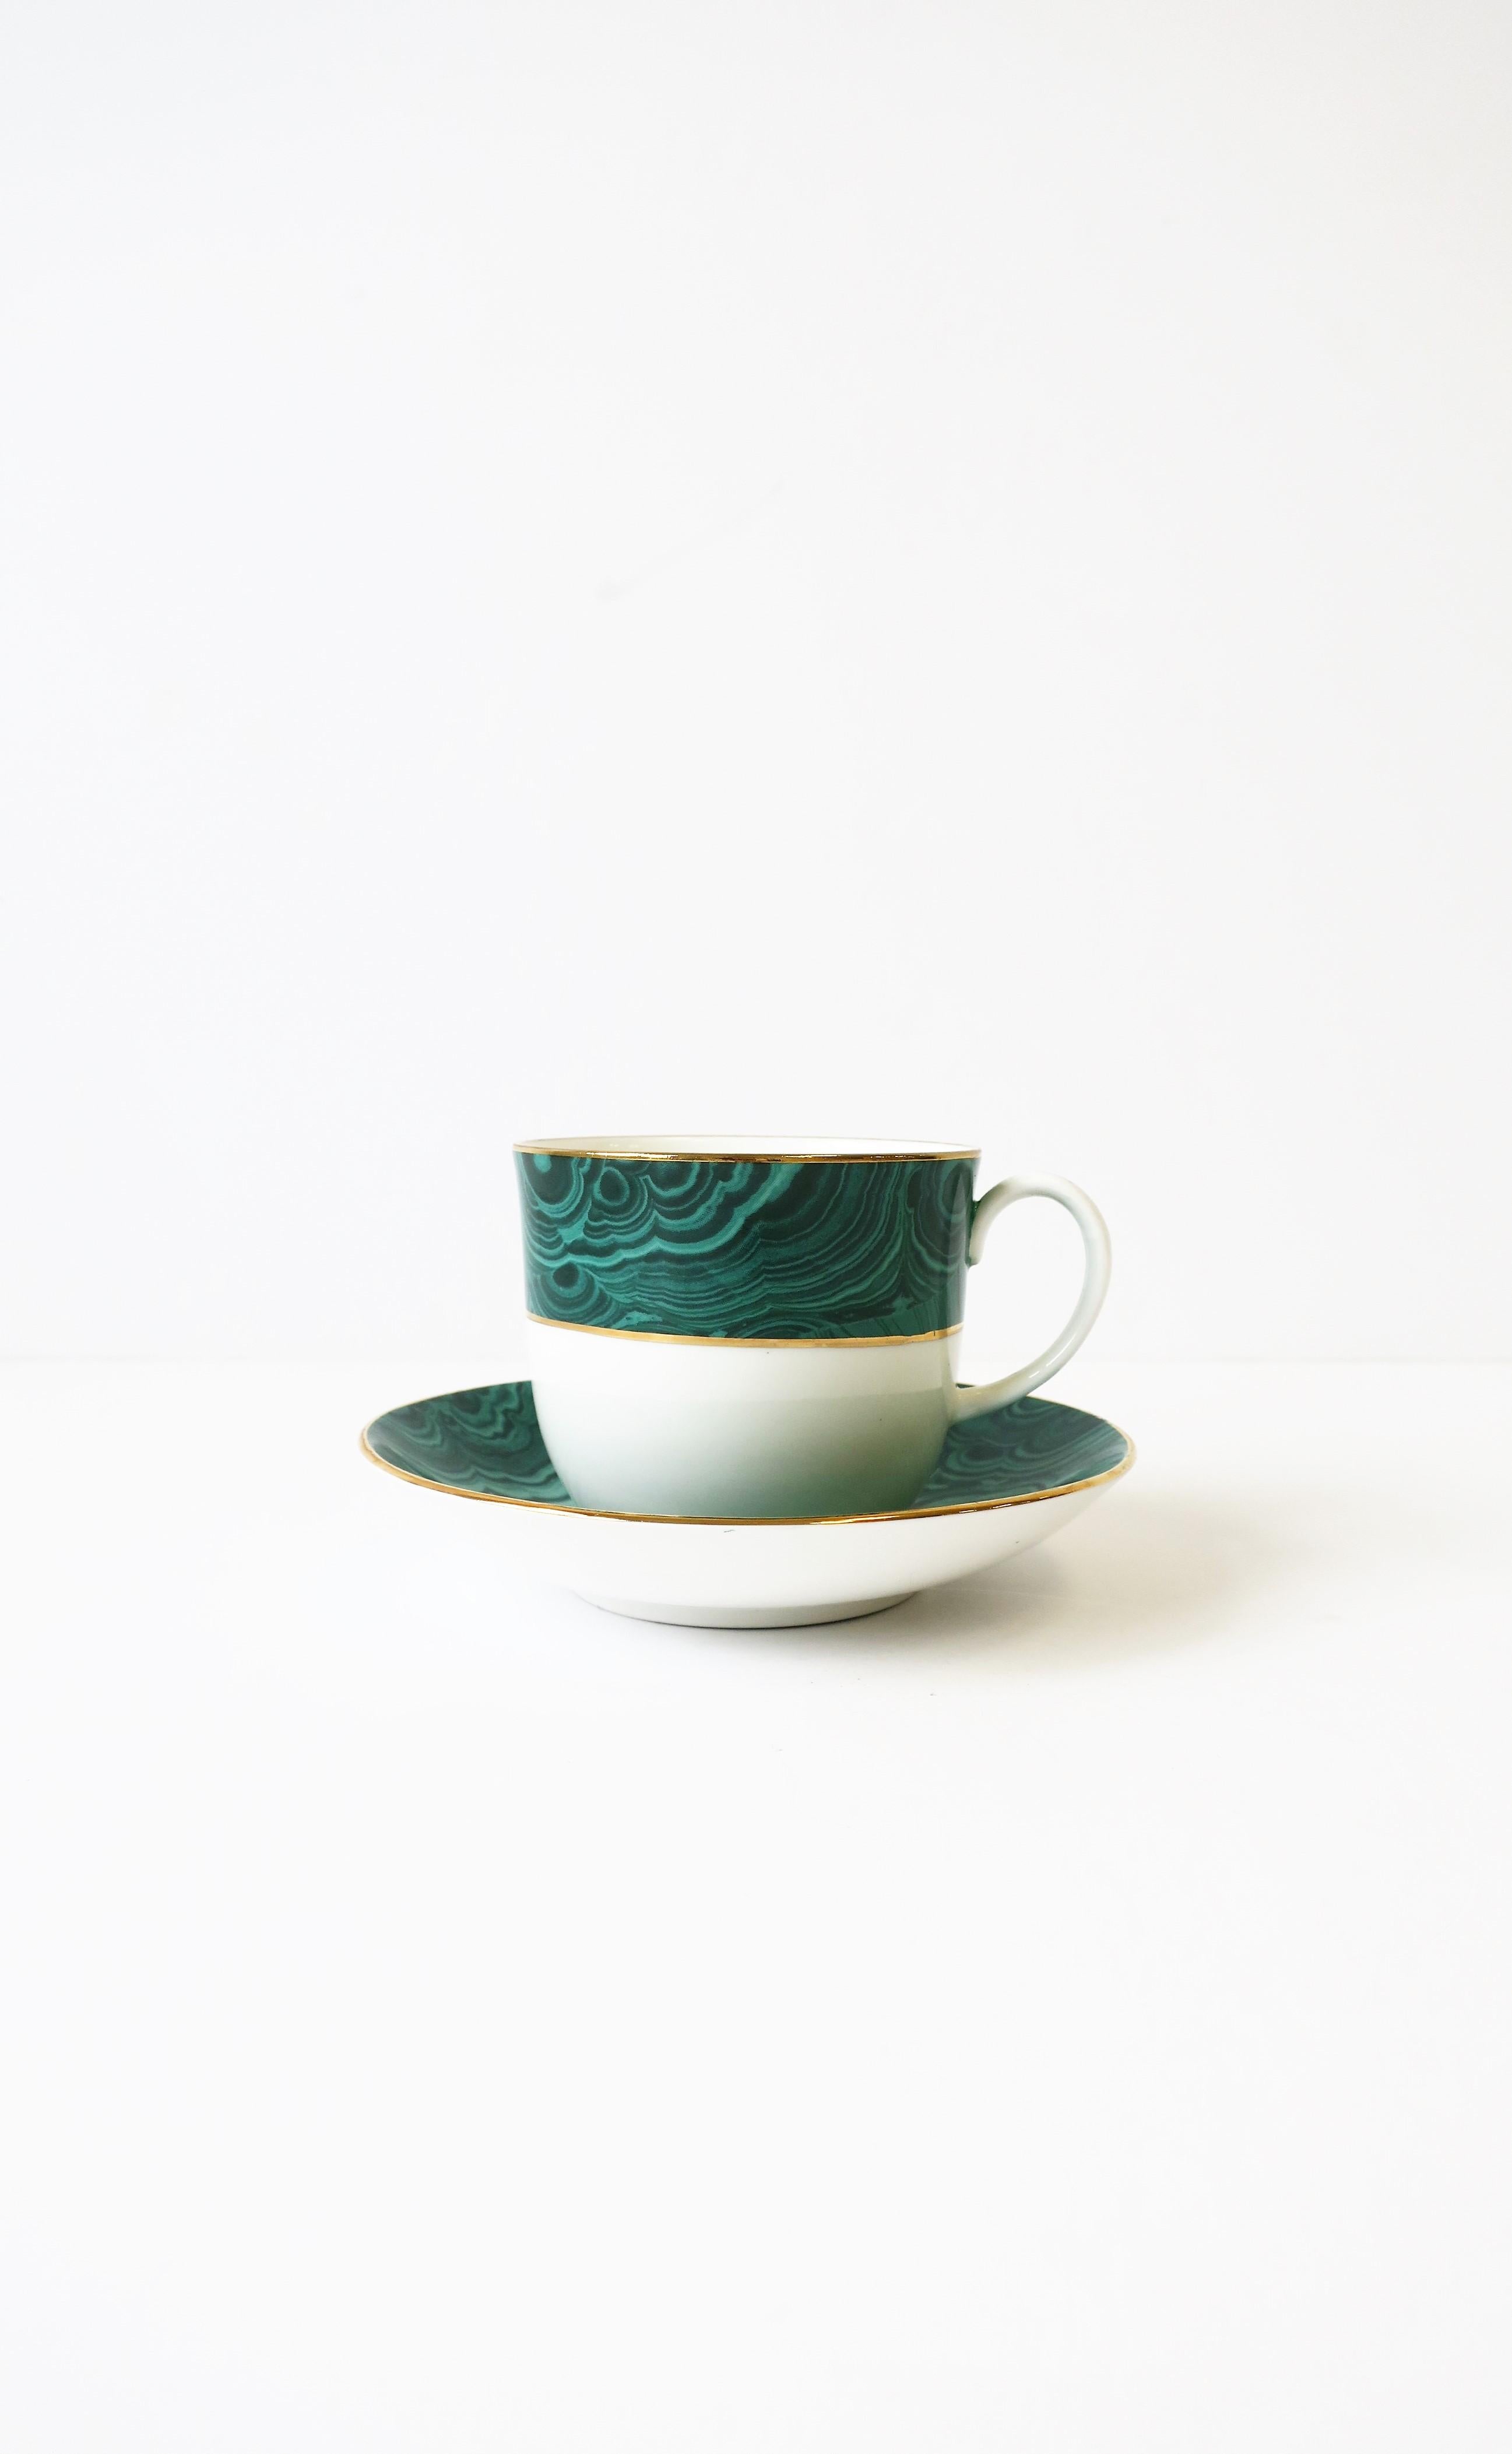 A beautiful English white porcelain coffee or tea cup and saucer with a green malachite design and a gold detailing on edge. Made in England. Two sets available, each sold separately as per listing.

Nesting tables show in images also available,